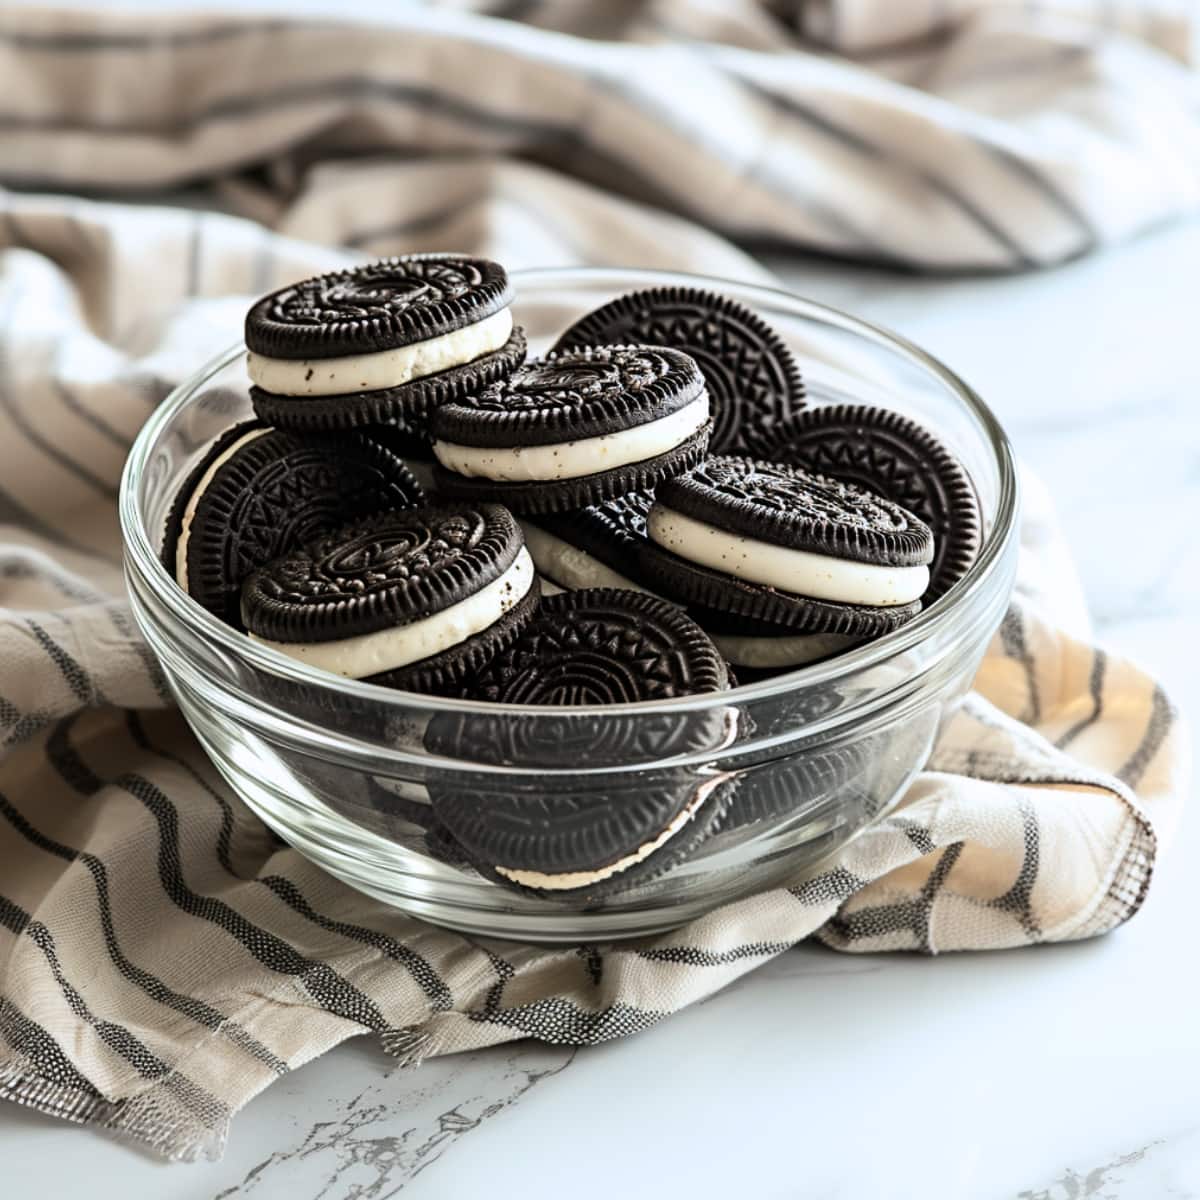 A glass bowl of sweet oreo cookies